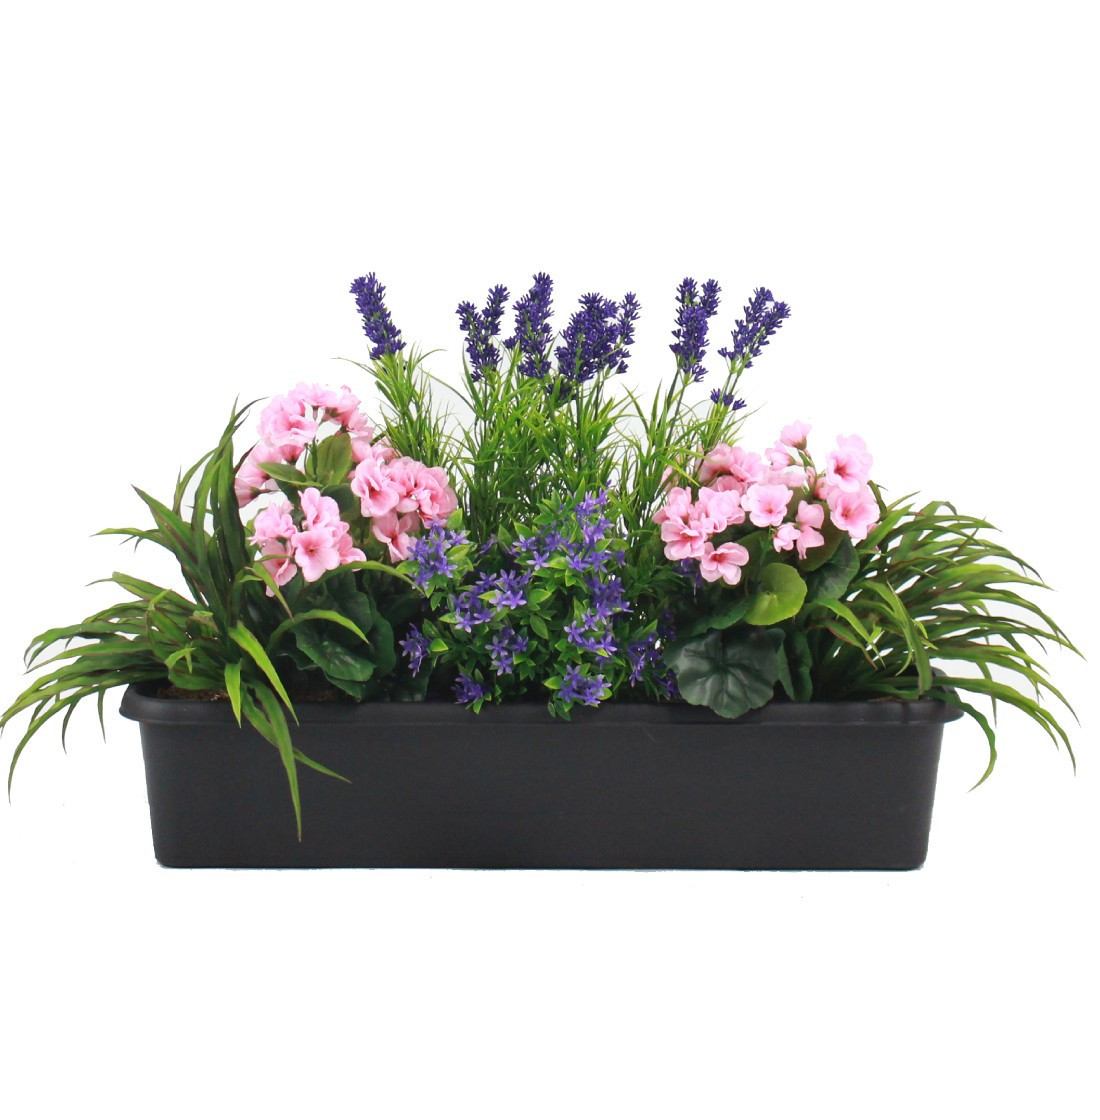 25 Nice In Ground Metalcraft Cemetery Vases 2024 free download in ground metalcraft cemetery vases of http pandoraocharms us artificial cemetery flowers http with artificial outdoor flowers mixed flower window box trough blooming